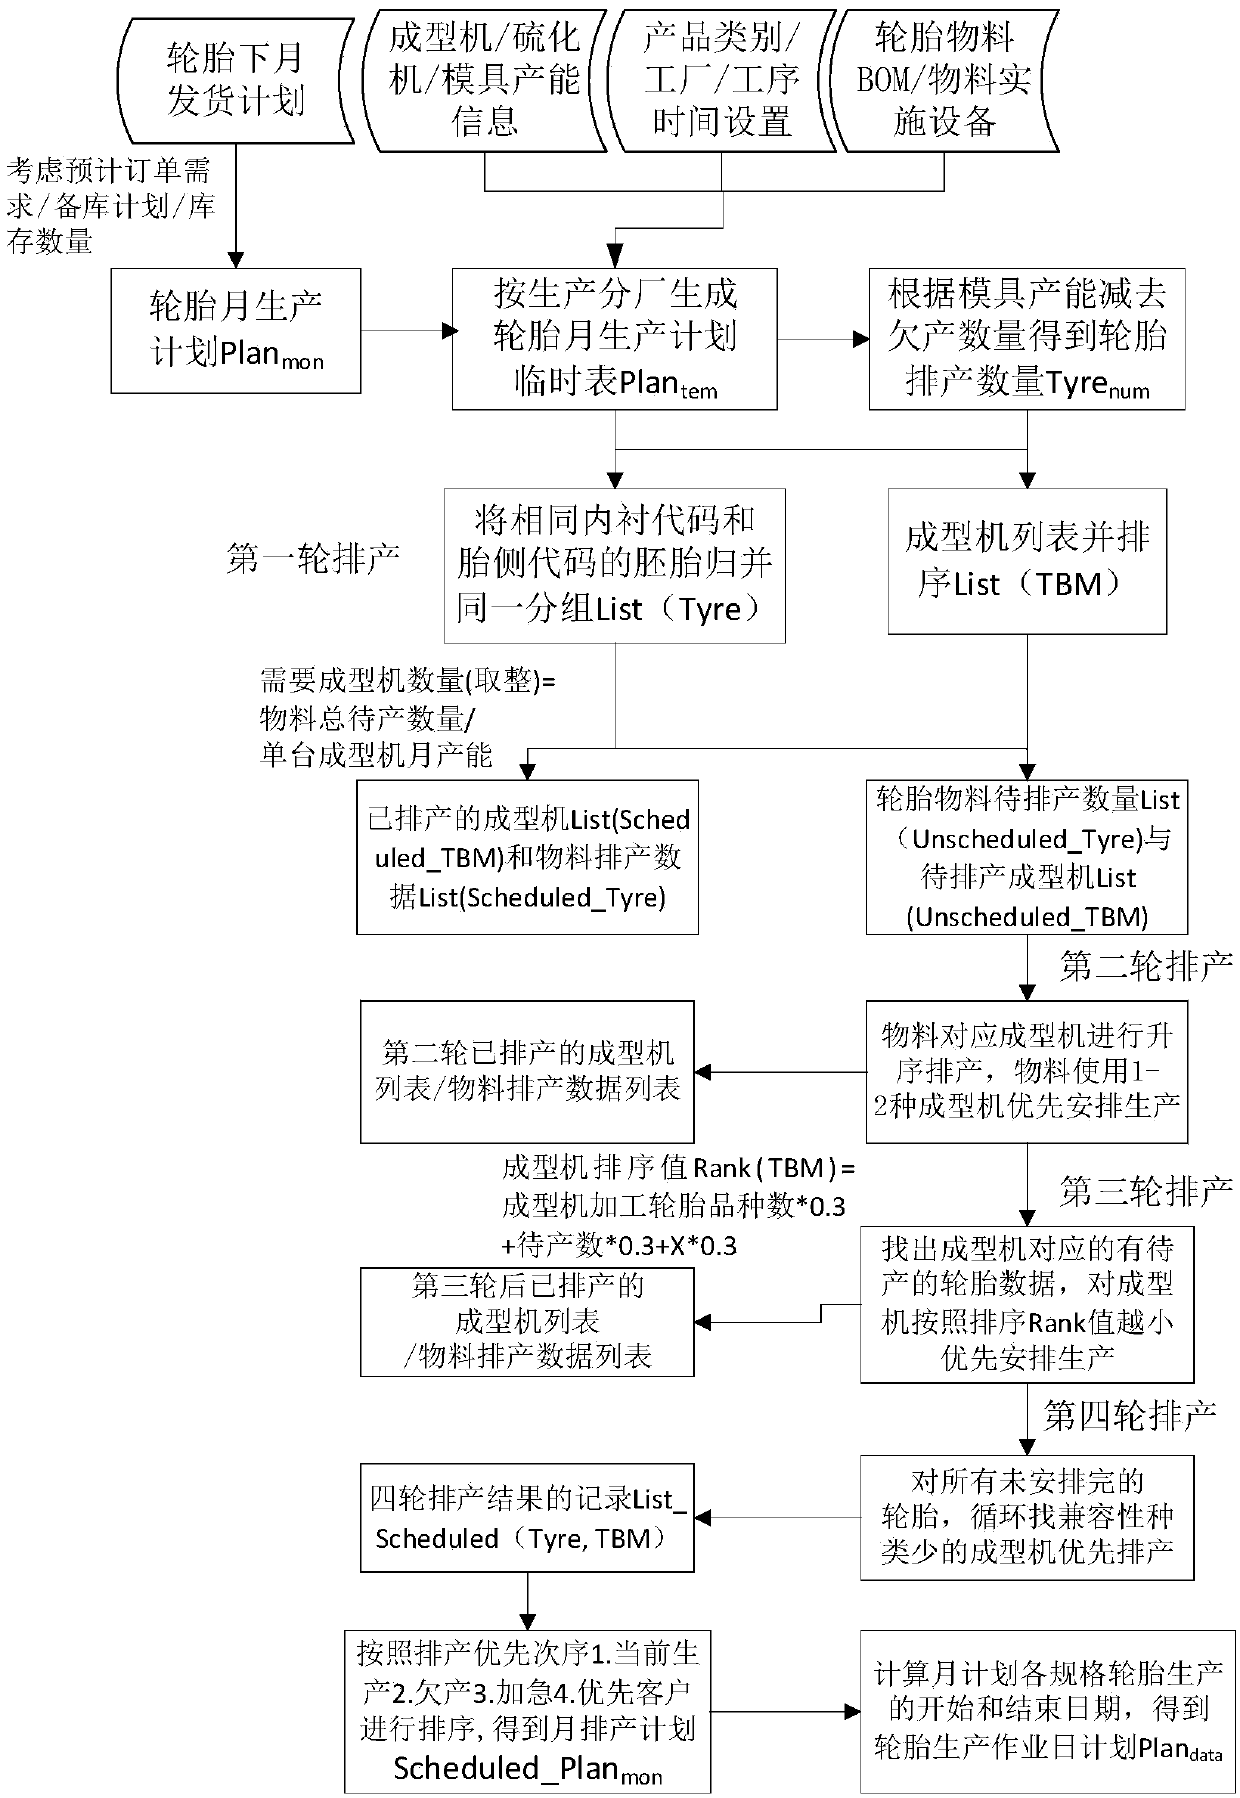 A method for scheduling production plan in a tire manufacture enterprise